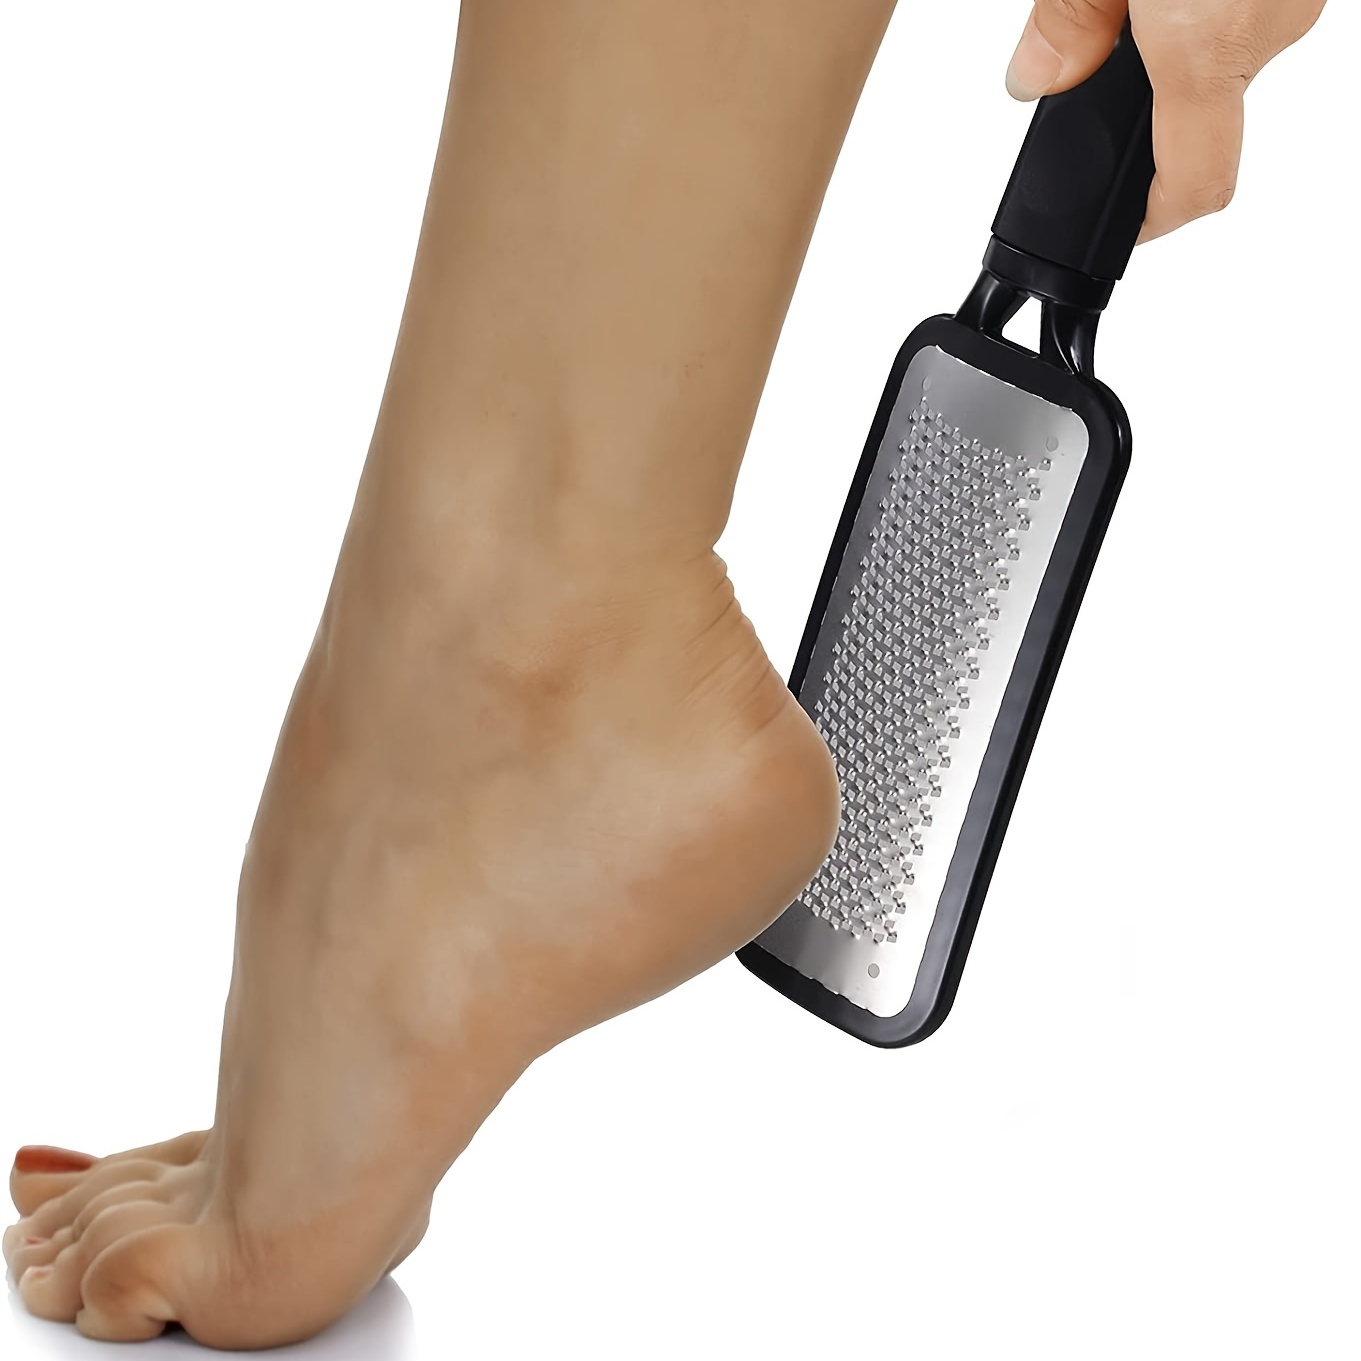 Rikans Colossal Foot Rasp Foot File And Callus Remover Review